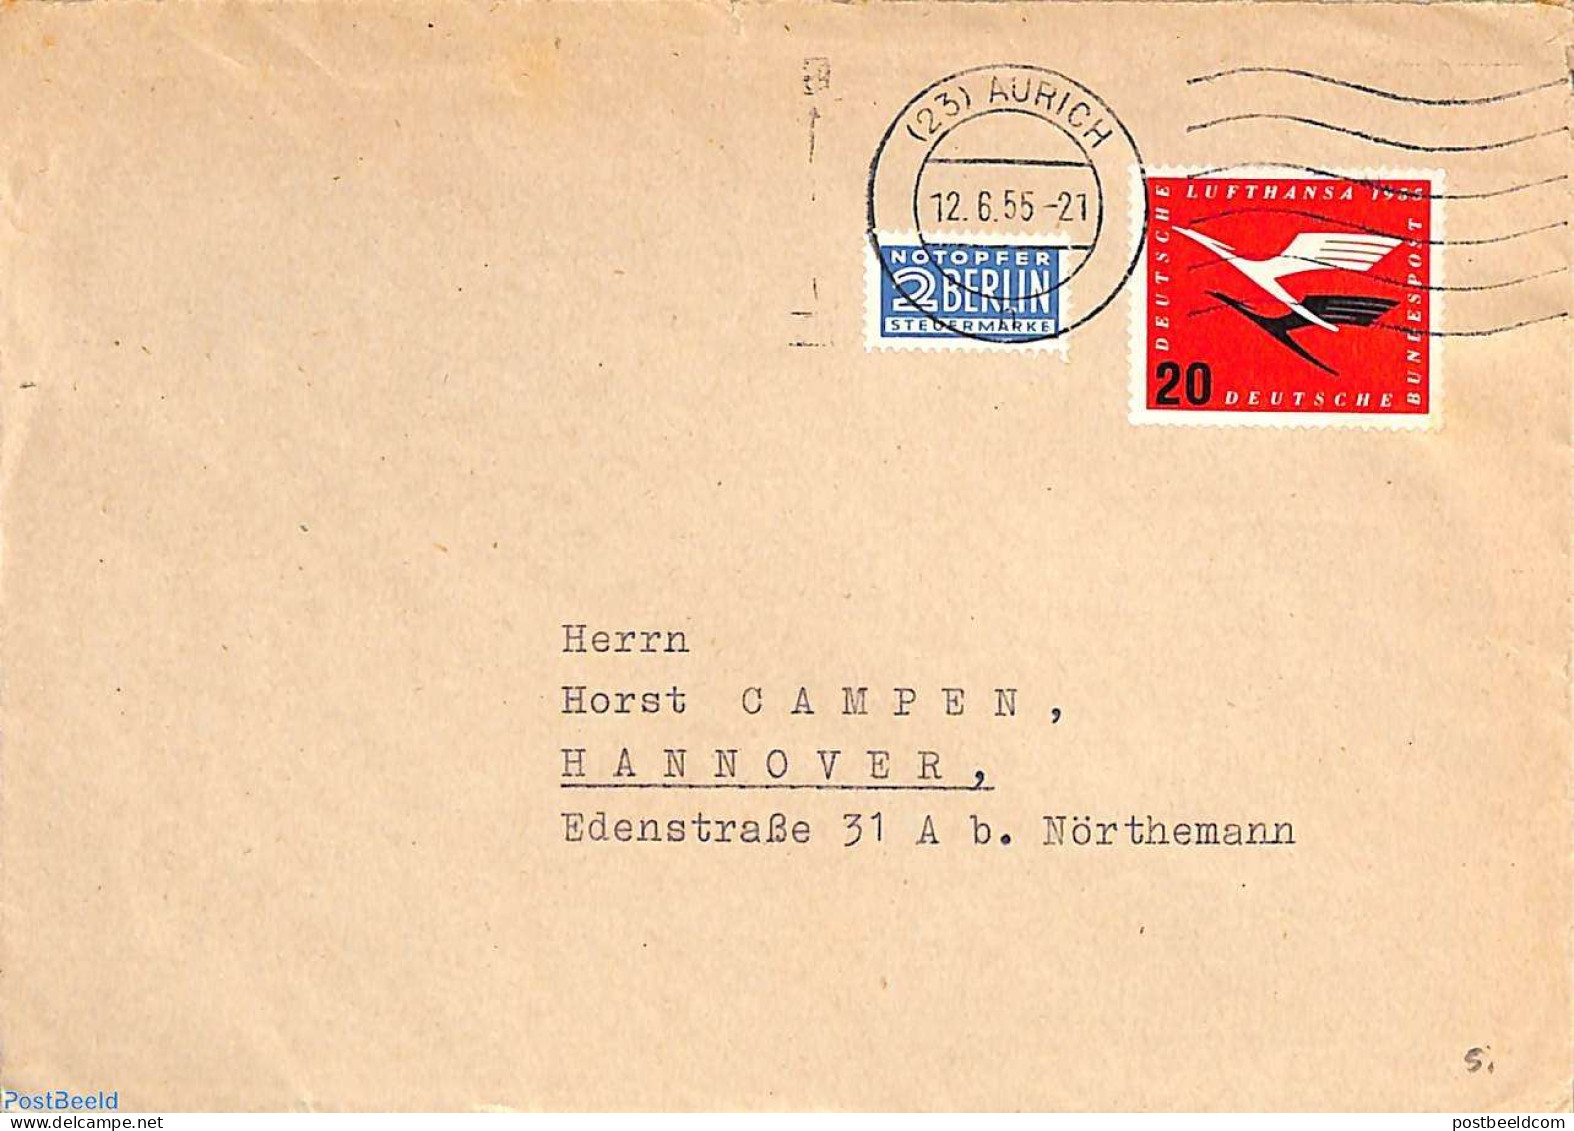 Germany, Federal Republic 1955 Letter  From Aurich To Hannover, Berlin Notopfer, Postal History - Lettres & Documents